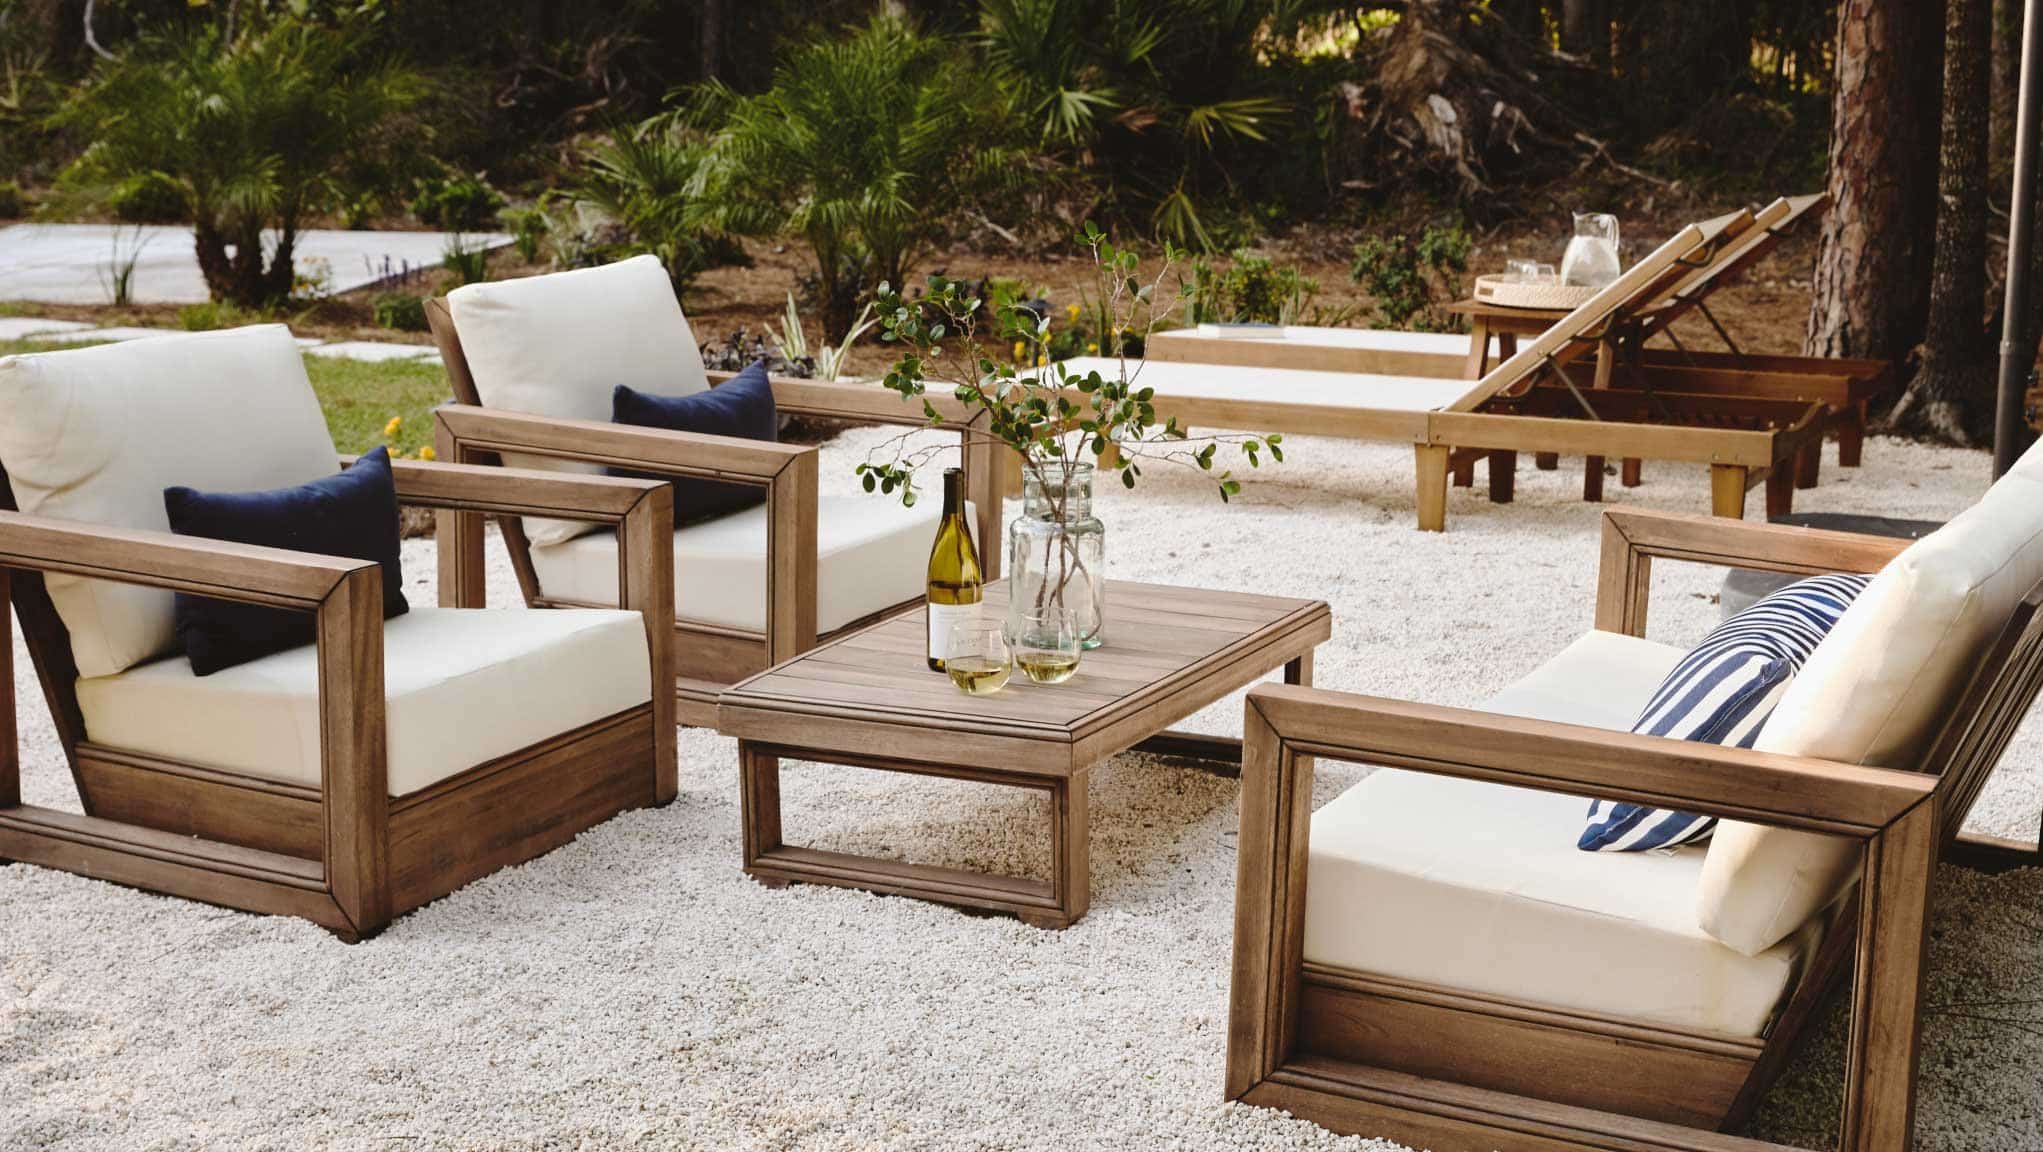 Close up of outdoor seating area with lounge chairs and coffee table